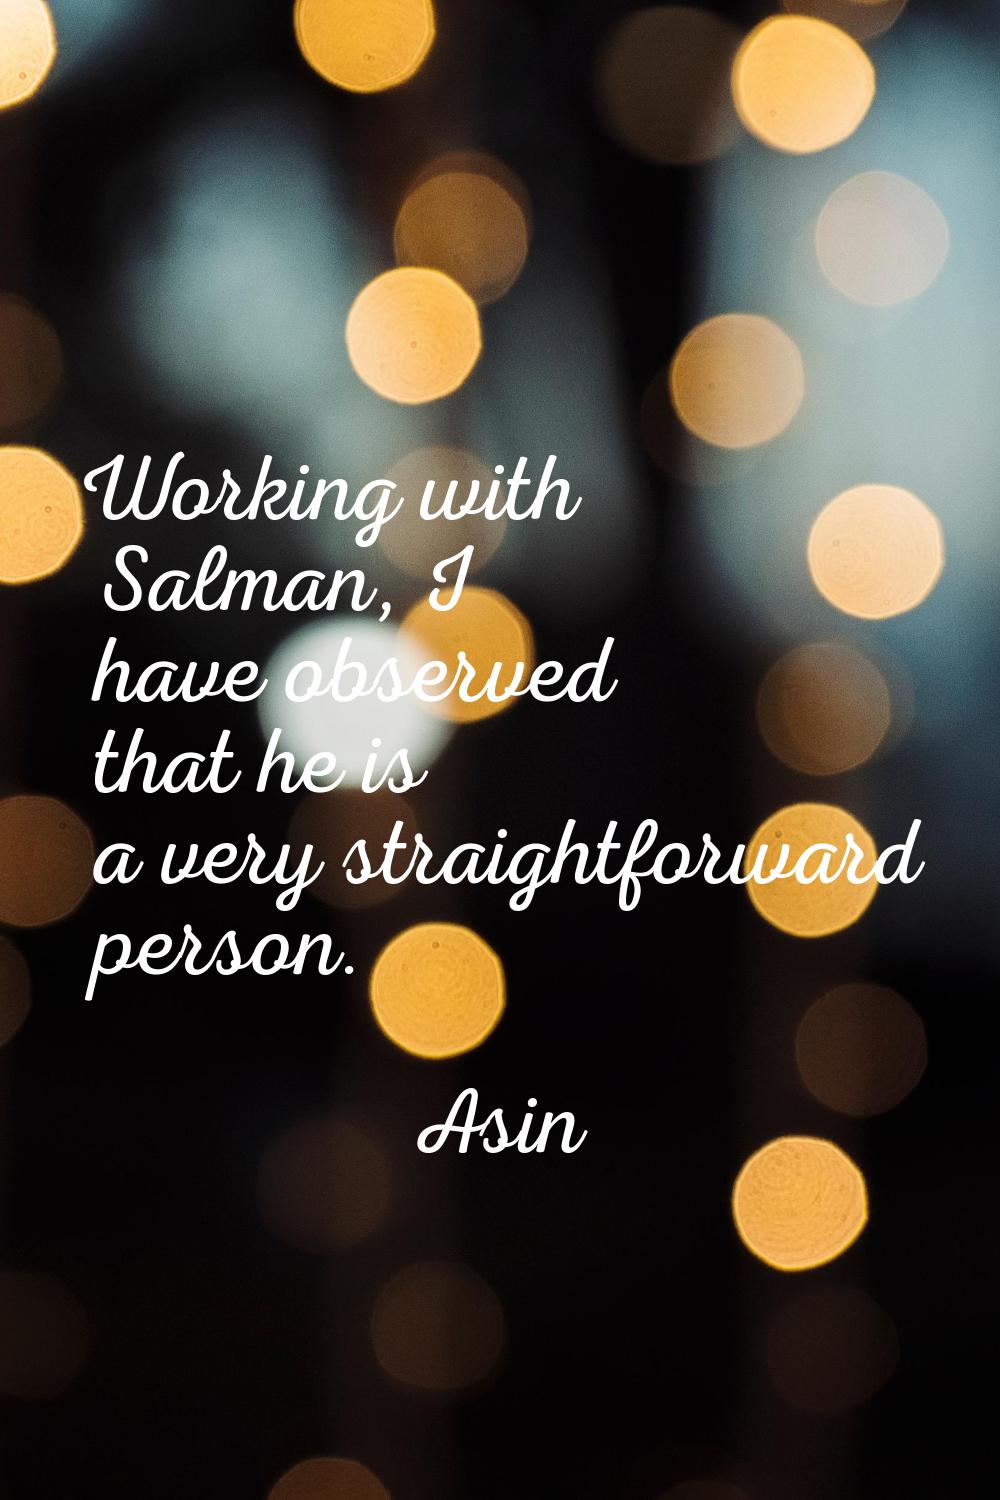 Working with Salman, I have observed that he is a very straightforward person.